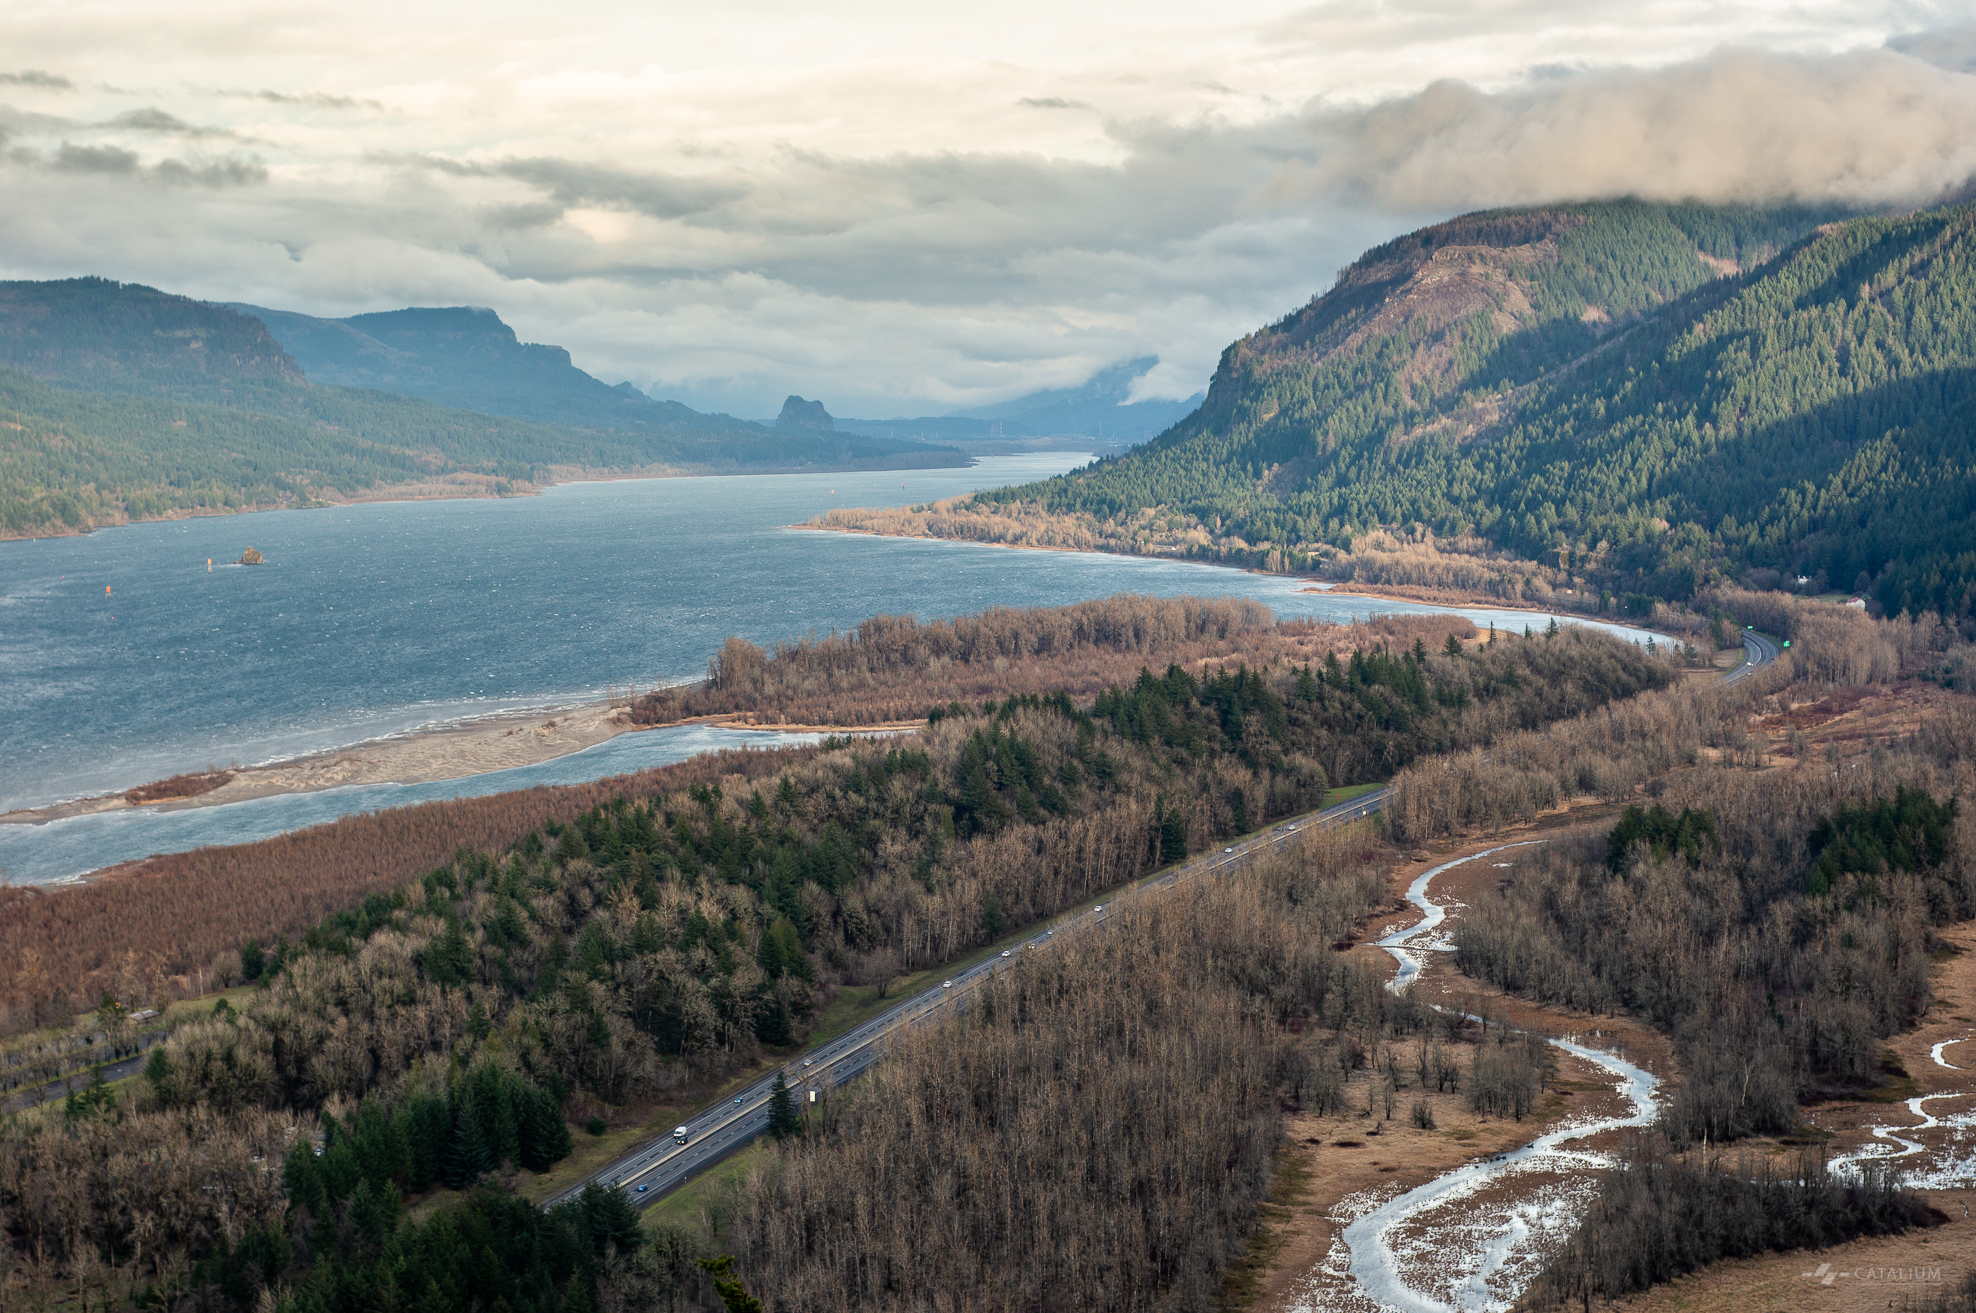 View of the Columbia River Gorge from the Vista House platform